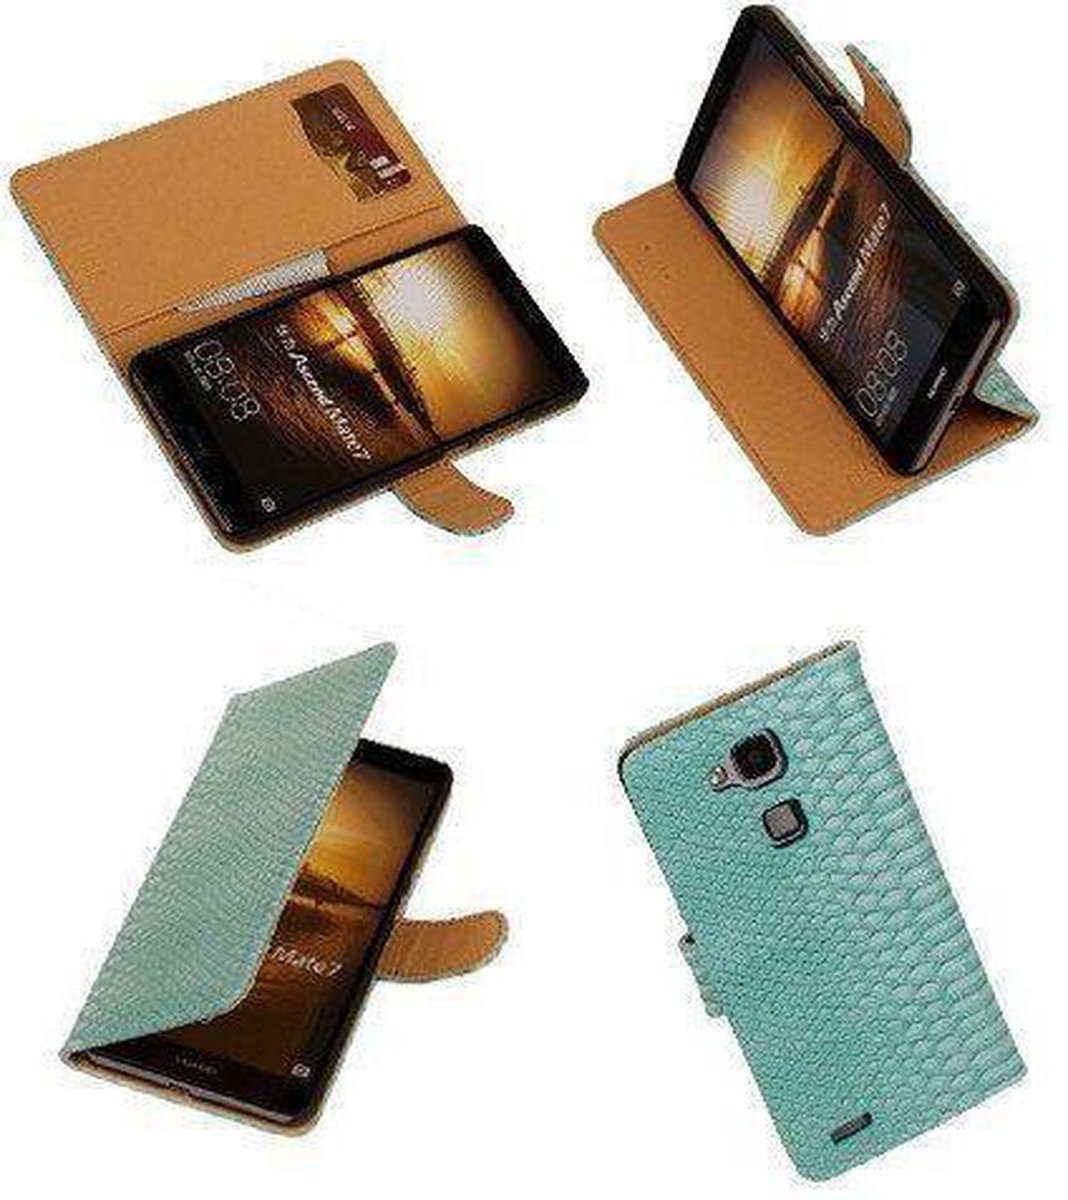 Slang Turquoise Huawei Ascend Mate 7 Bookcase Cover Hoesje